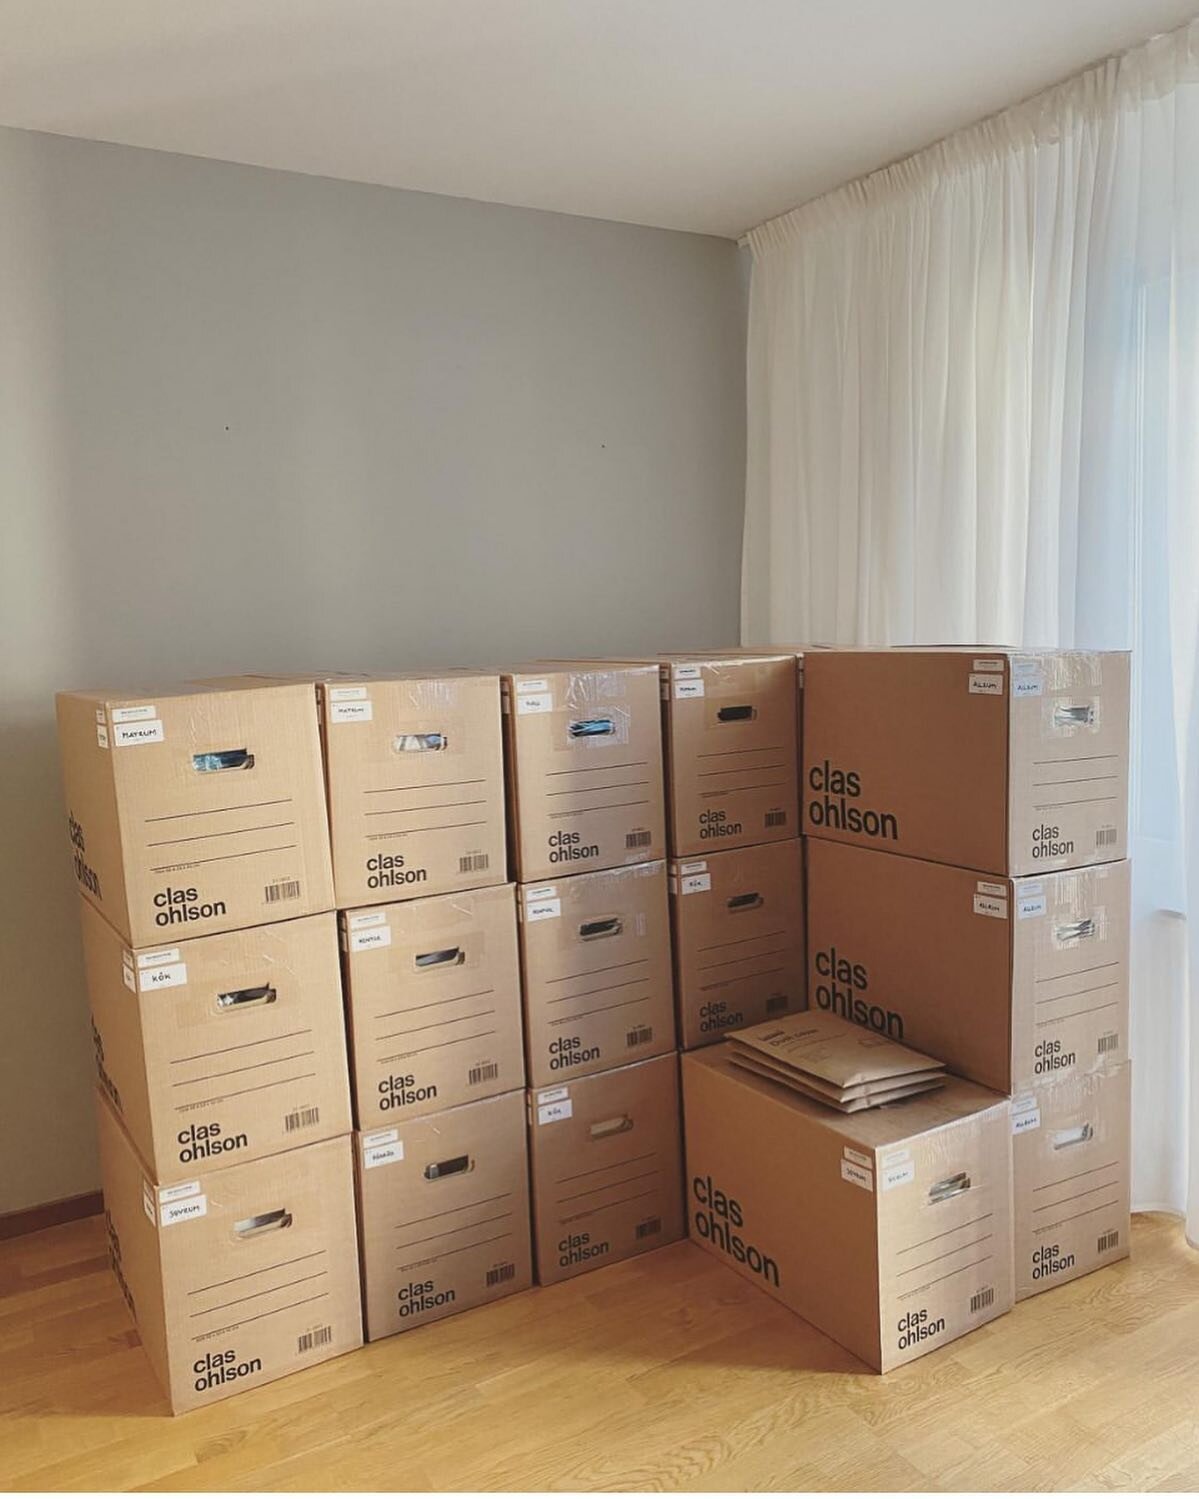 WEDNESDAY WISDOM!!!
WE just don&rsquo;t pack really well.  WE pay special attention to making sure when we prepare boxes for the removalists - it is super organised! #organise #dont #agonise #wednesday #wisdom #pack #valet #unpack #sort #declutter